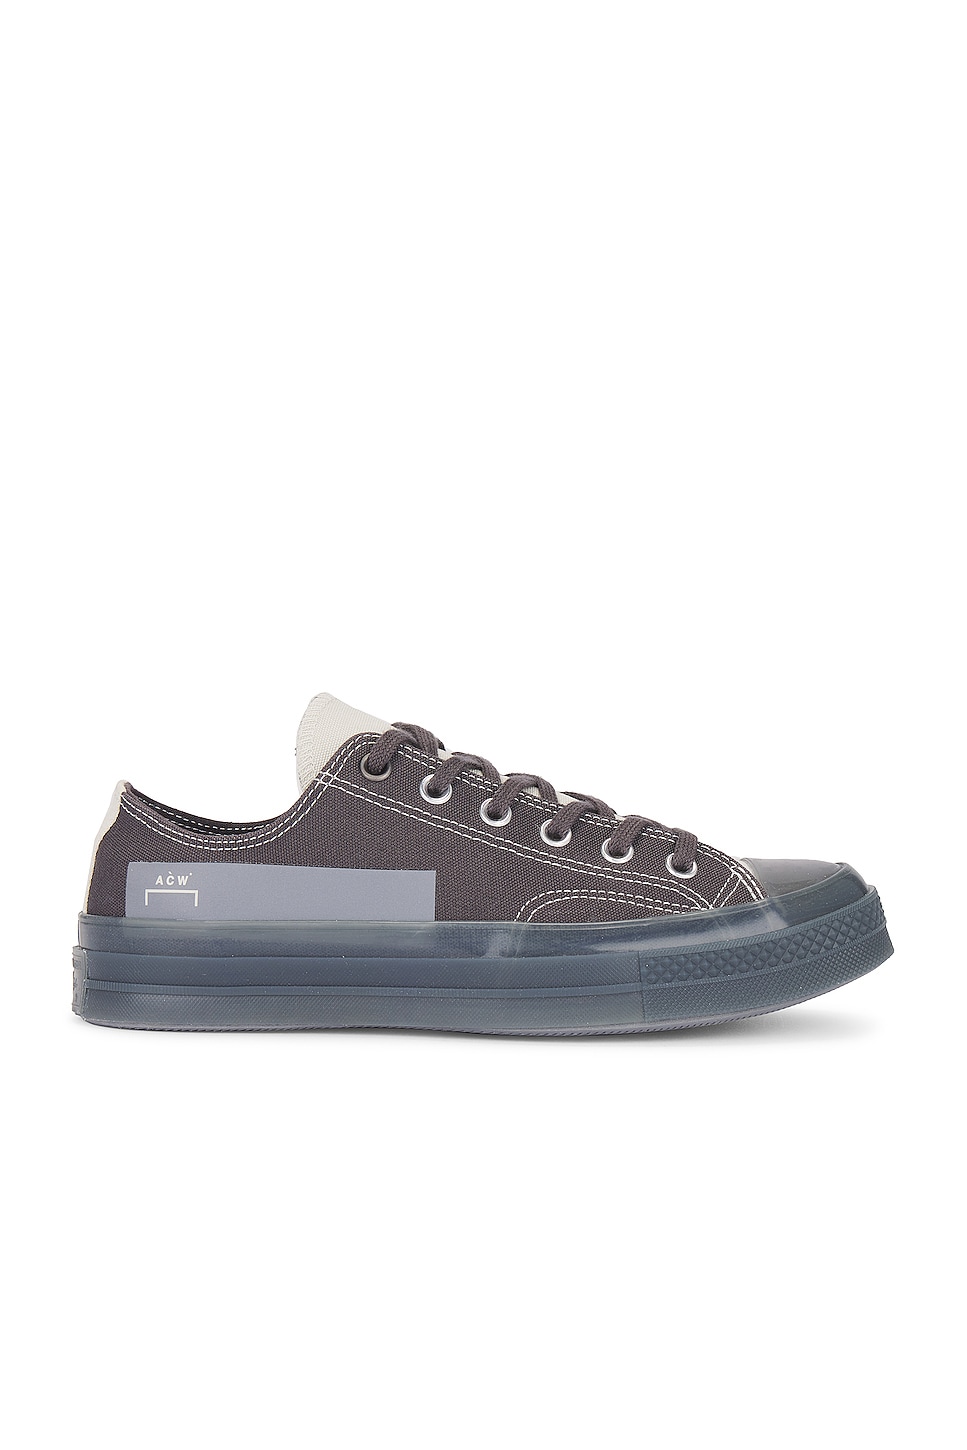 Image 1 of Converse A Cold Wall Chuck 70 in Silver Birch, Pavement, & Steel Gray